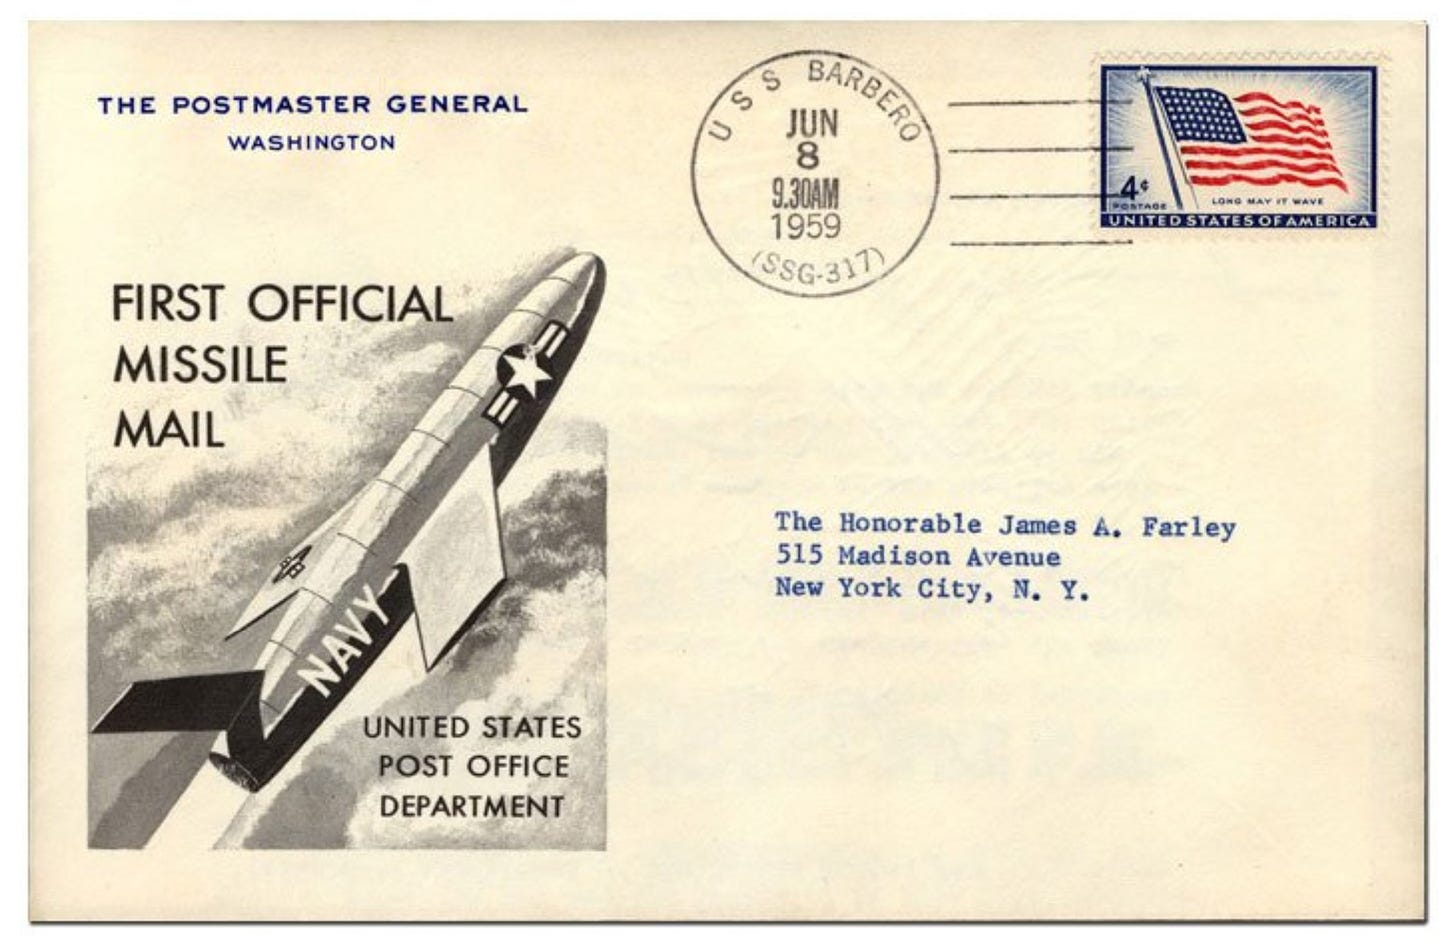 Screenshot of one of the envelopes mailed from USS Barbero.